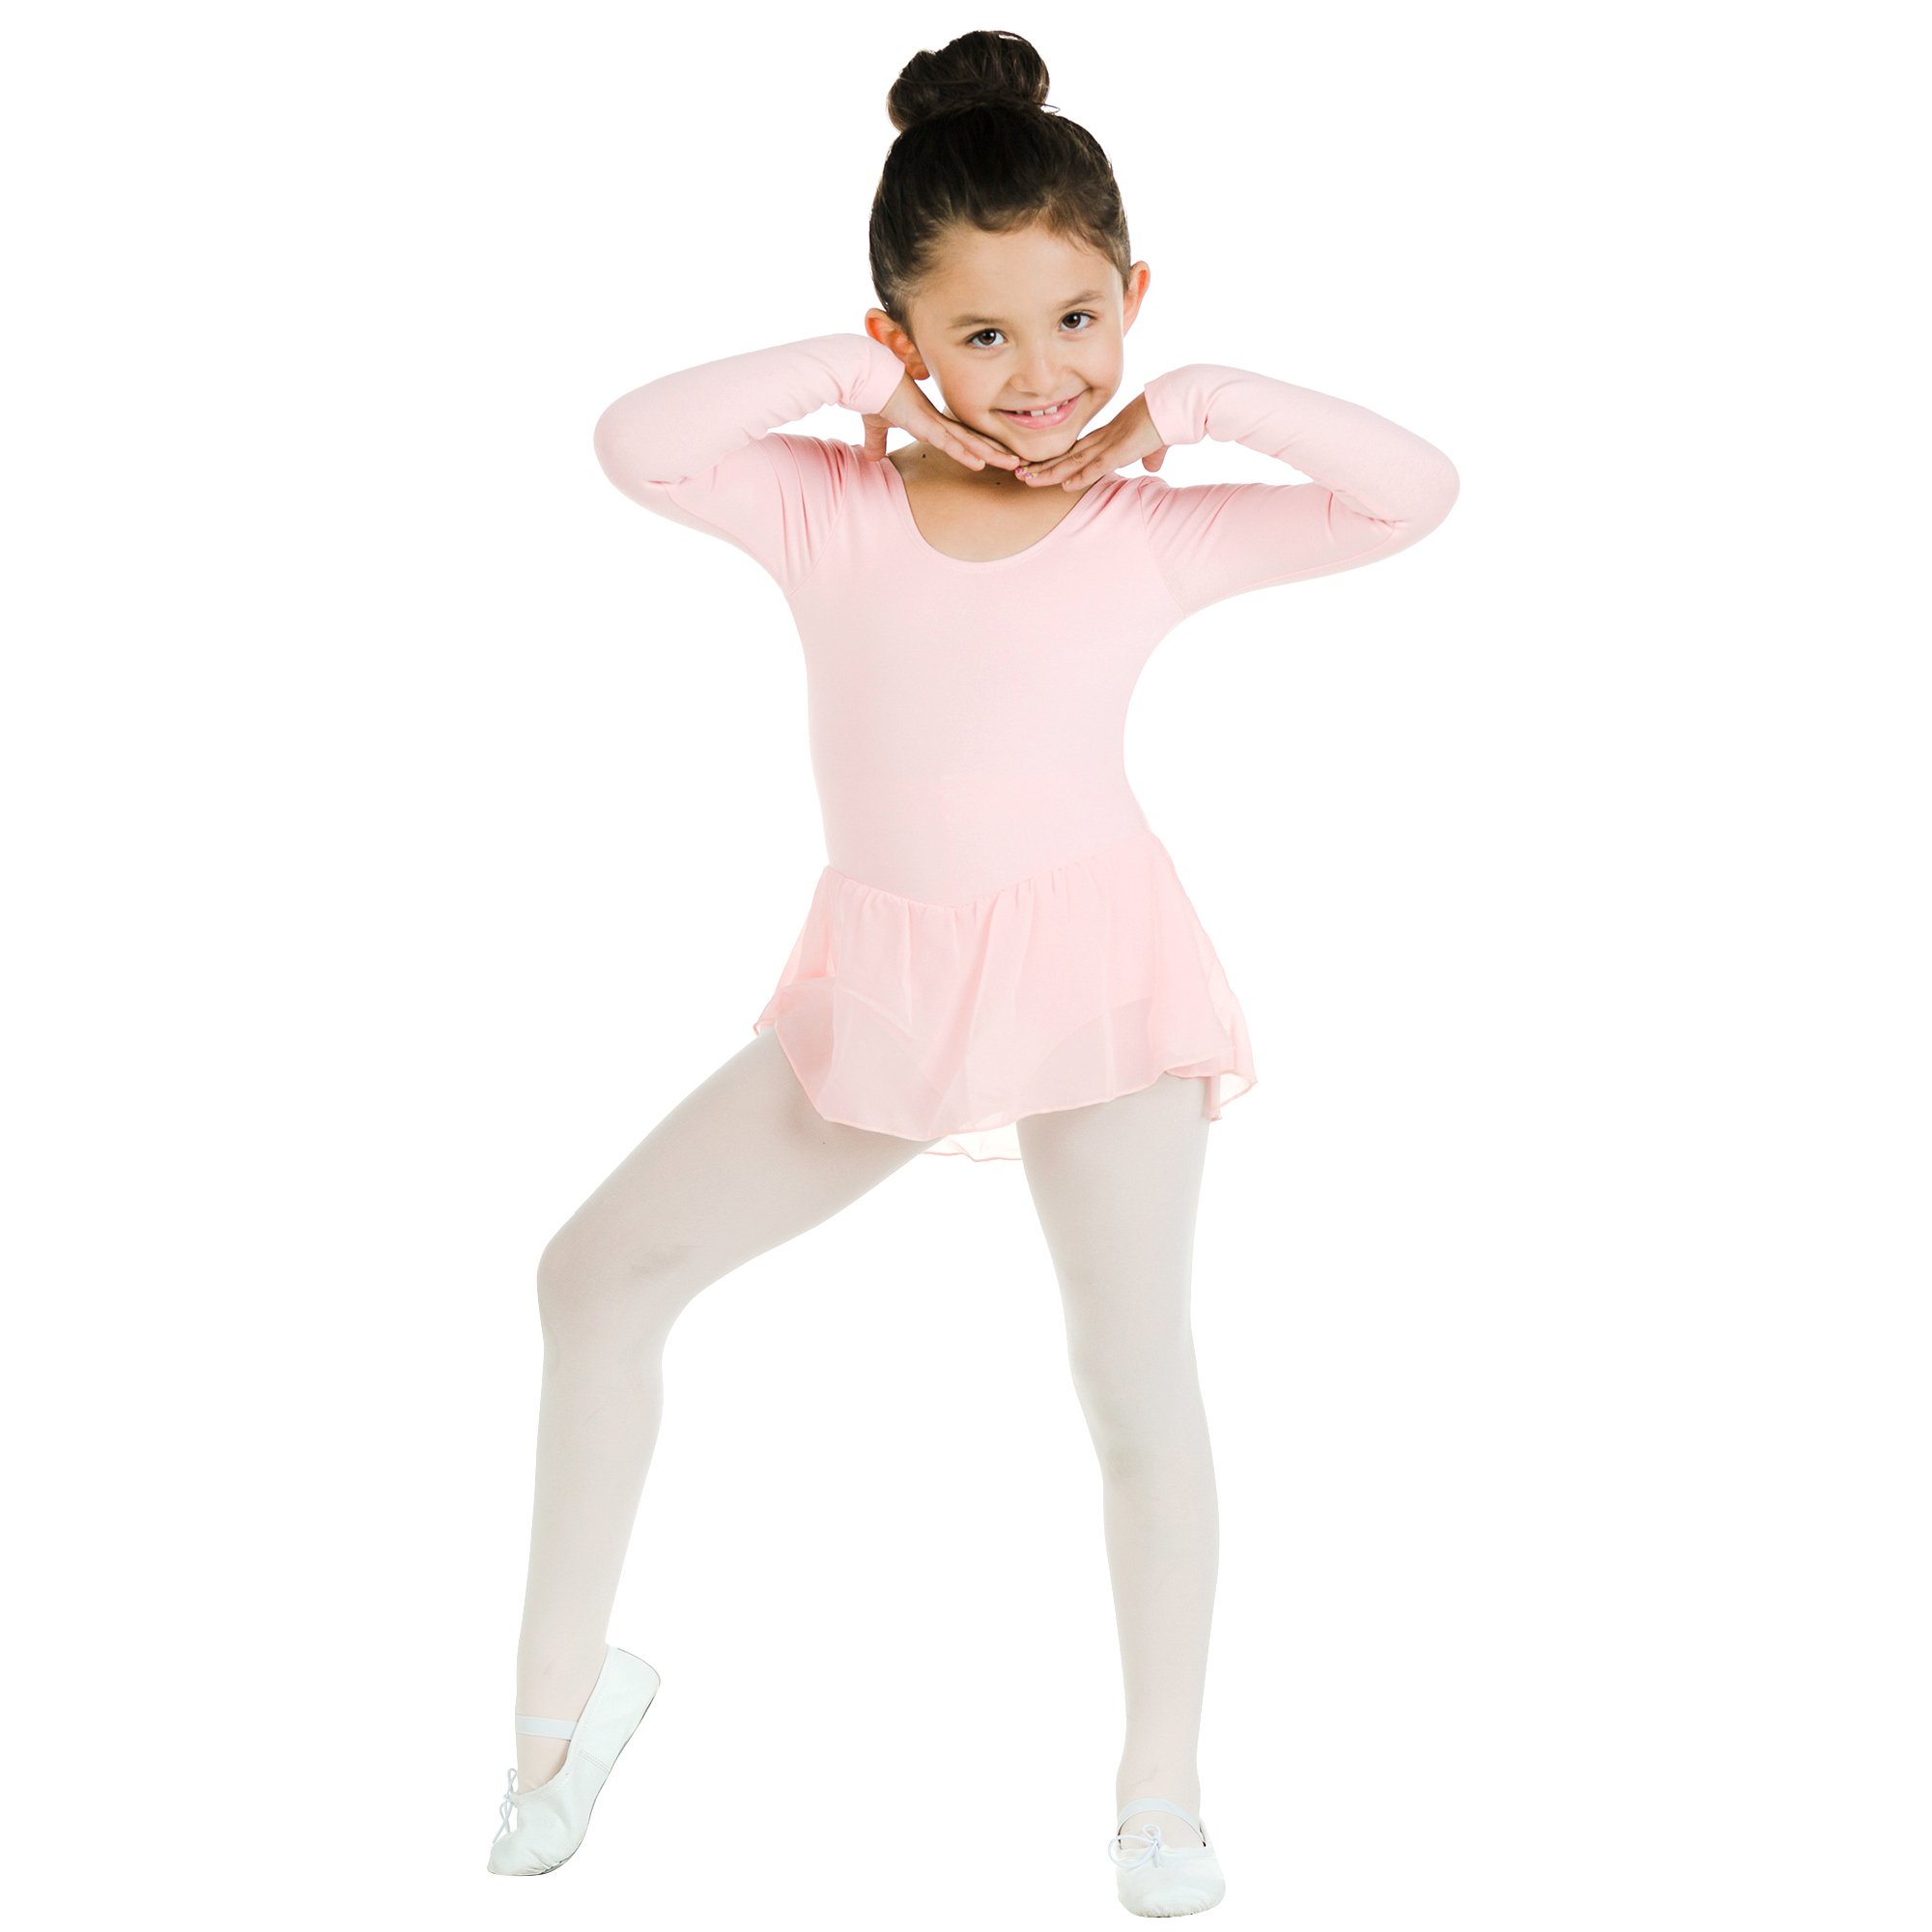 Danzcue Child Long Sleeve Dressed leotard - Click Image to Close